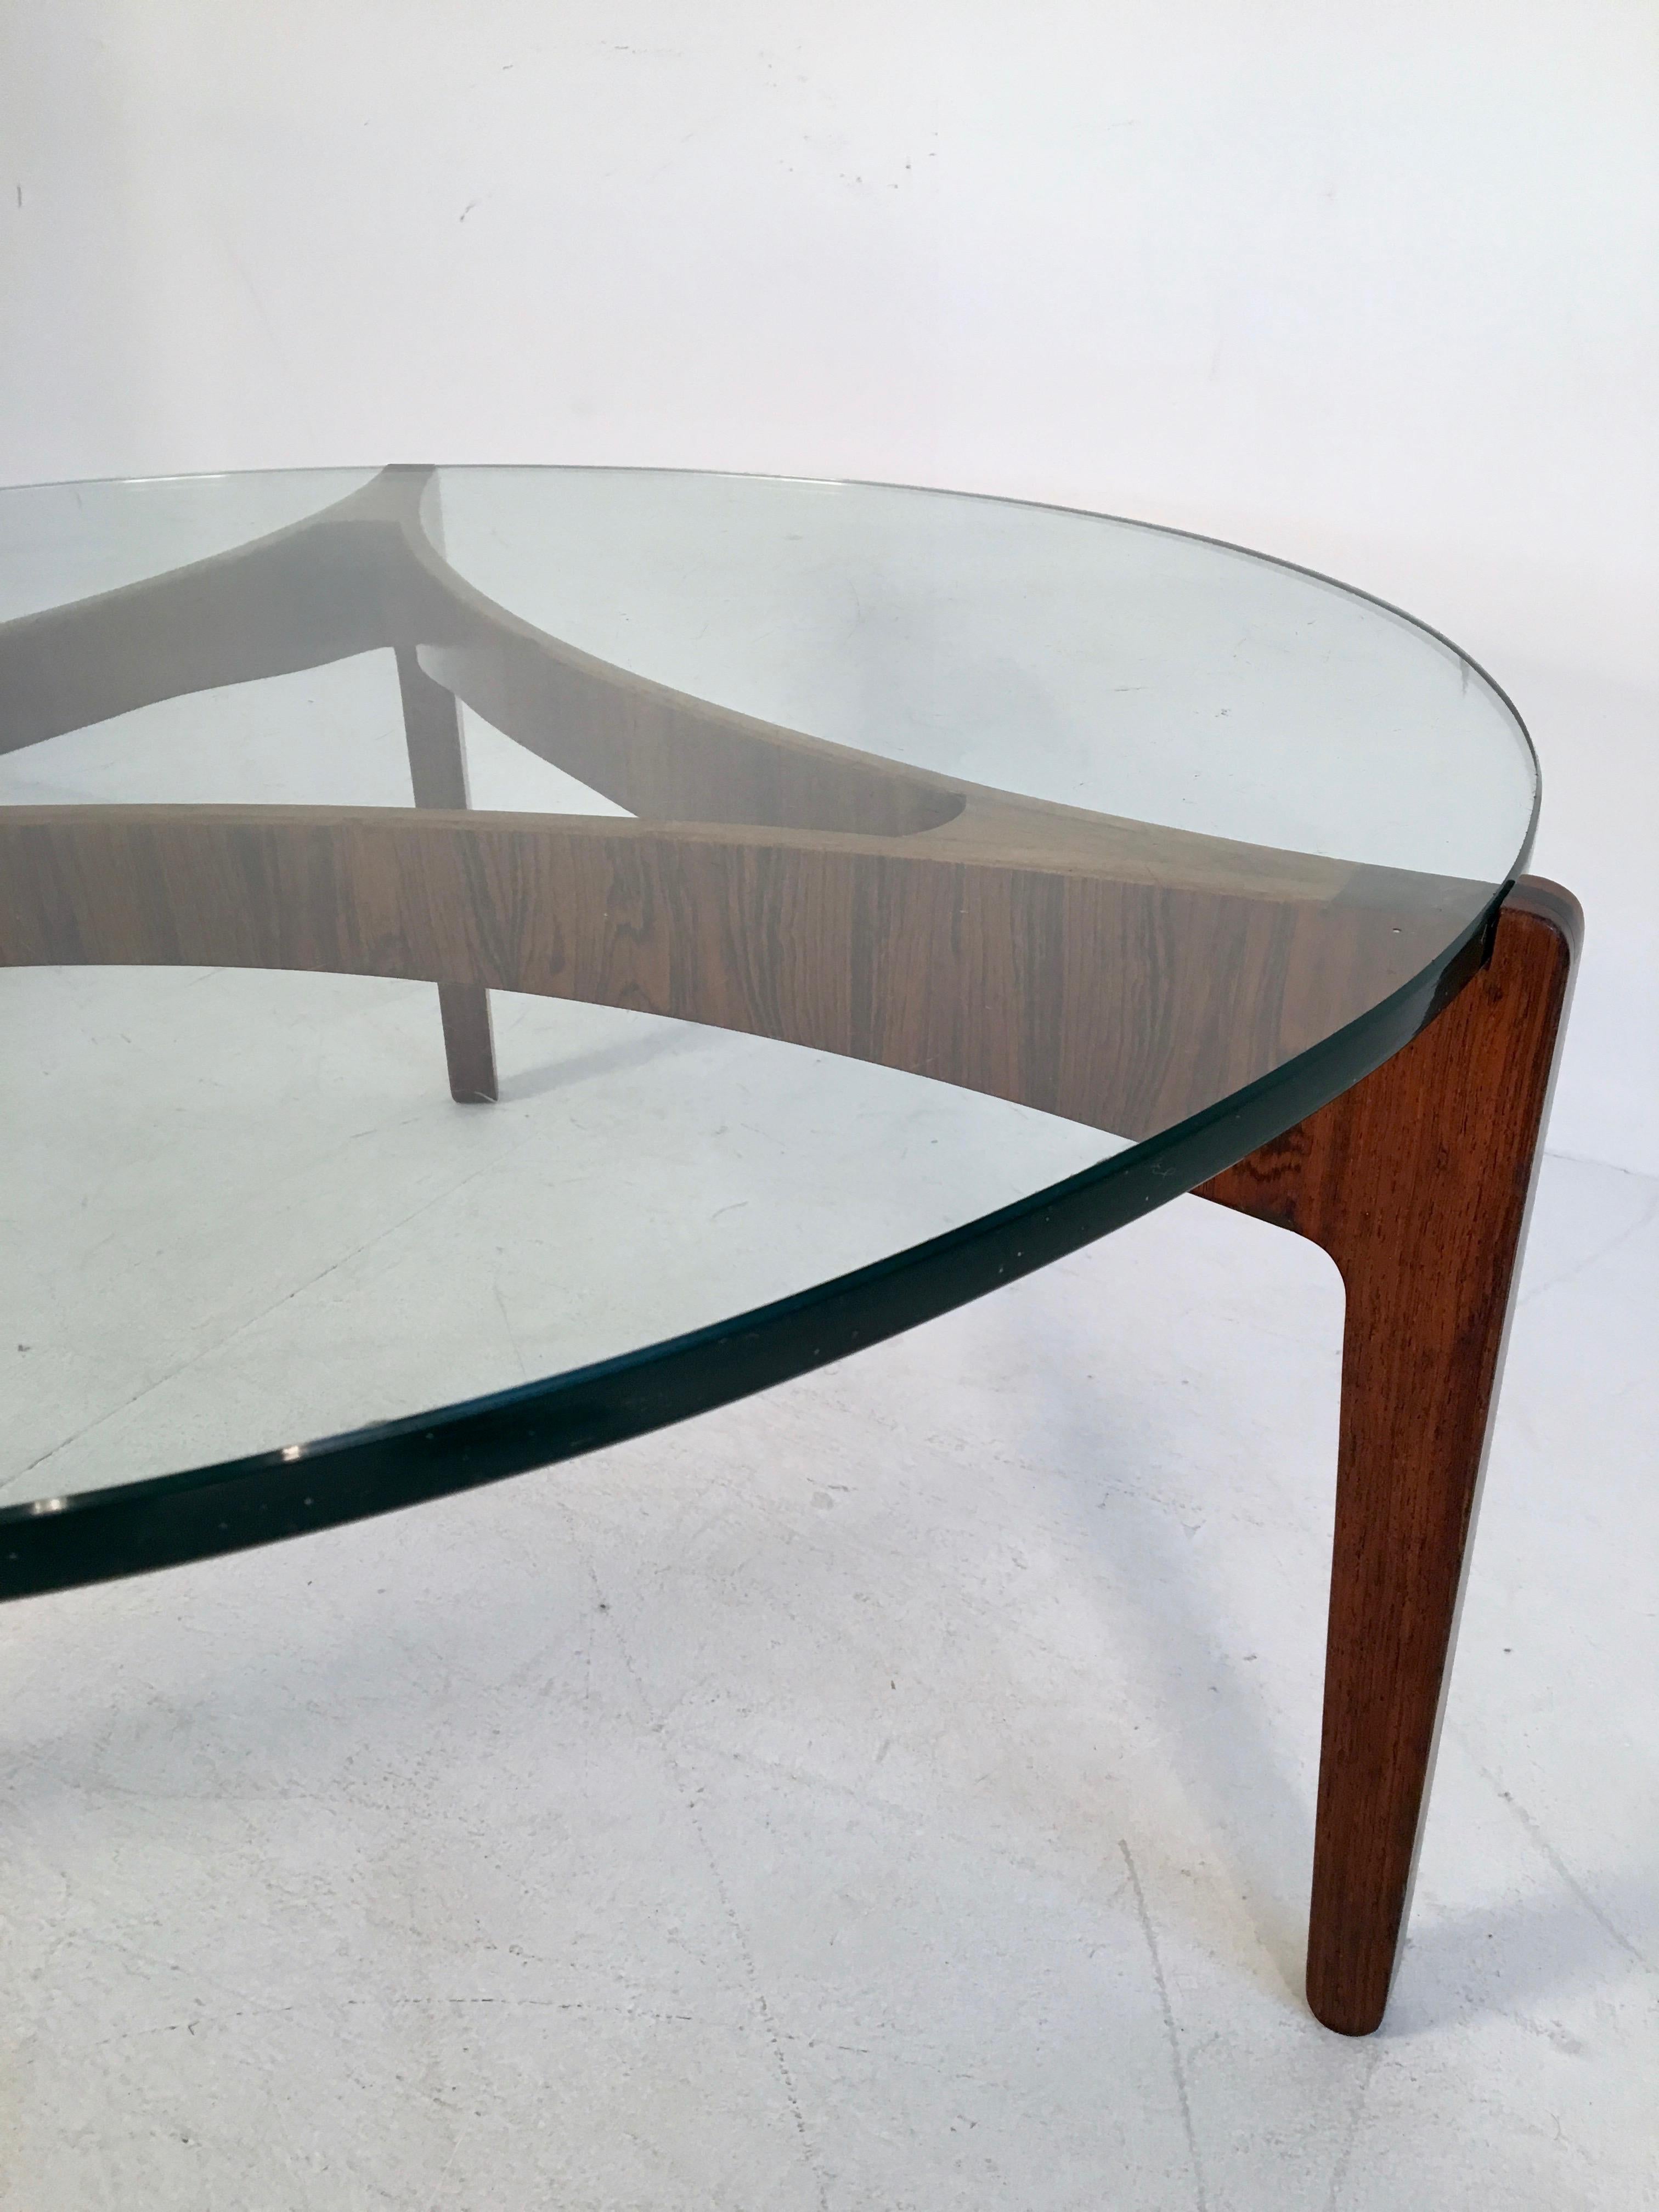 Danish Midcentury Rosewood and Glass Coffee Table by S. Ellekaer, Denmark, circa 1960